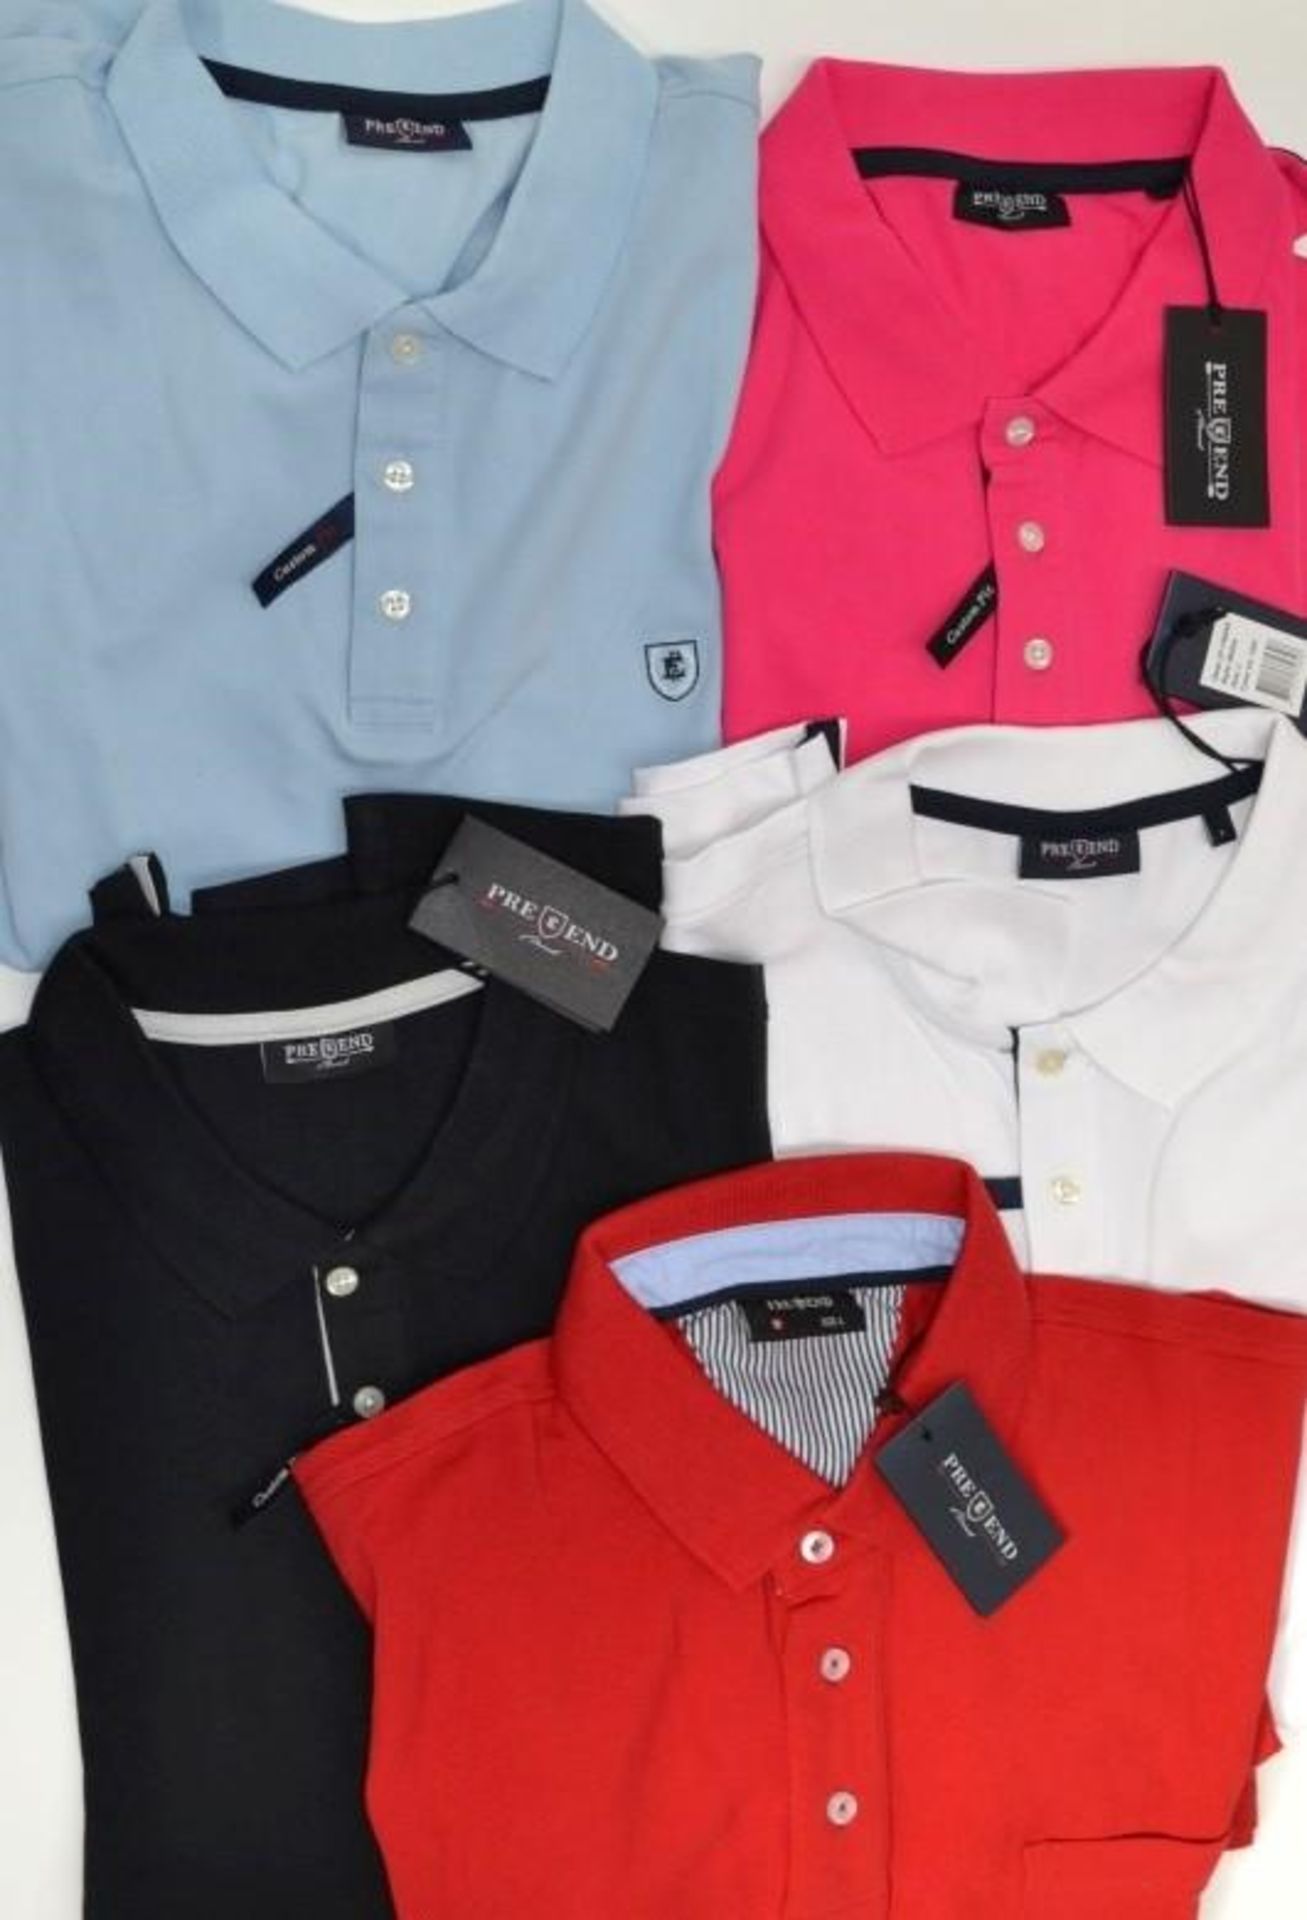 5 x Assorted Pre End Branded Mens Short Sleeve Polo Shirts - New Stock With Tags - Recent Retail - Image 2 of 6